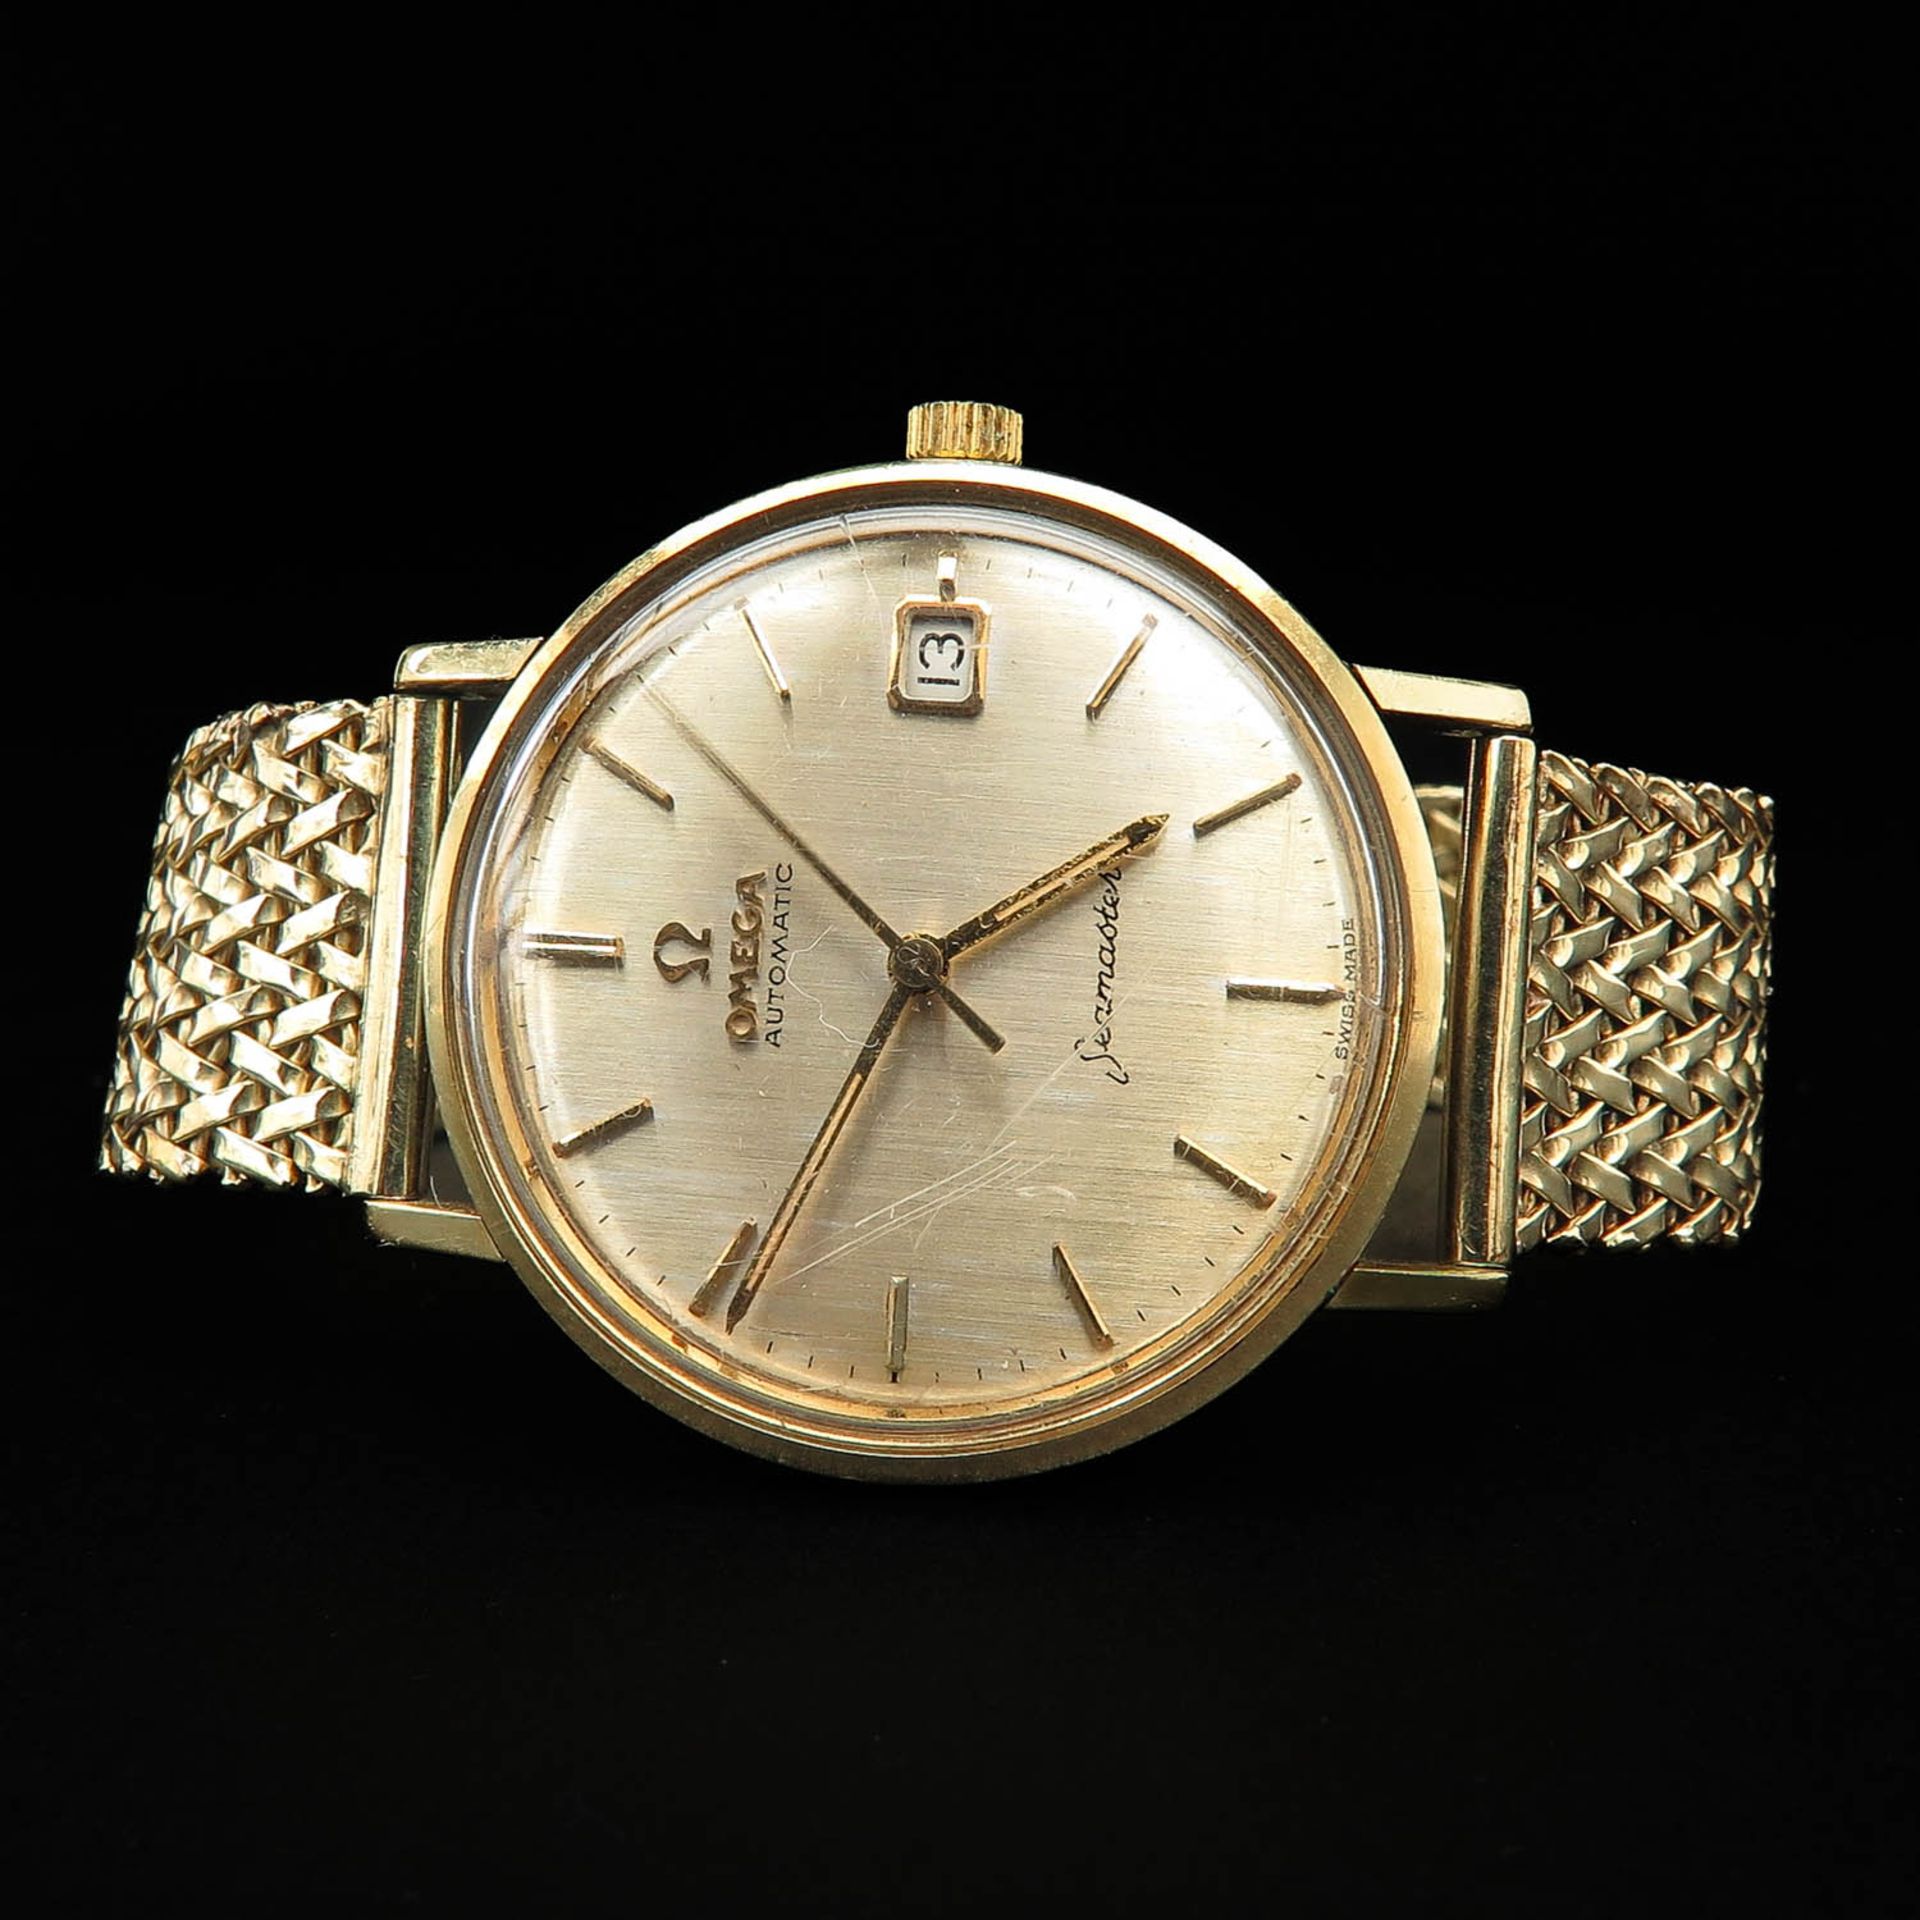 A Mens Omega Seamaster Watch - Image 3 of 5